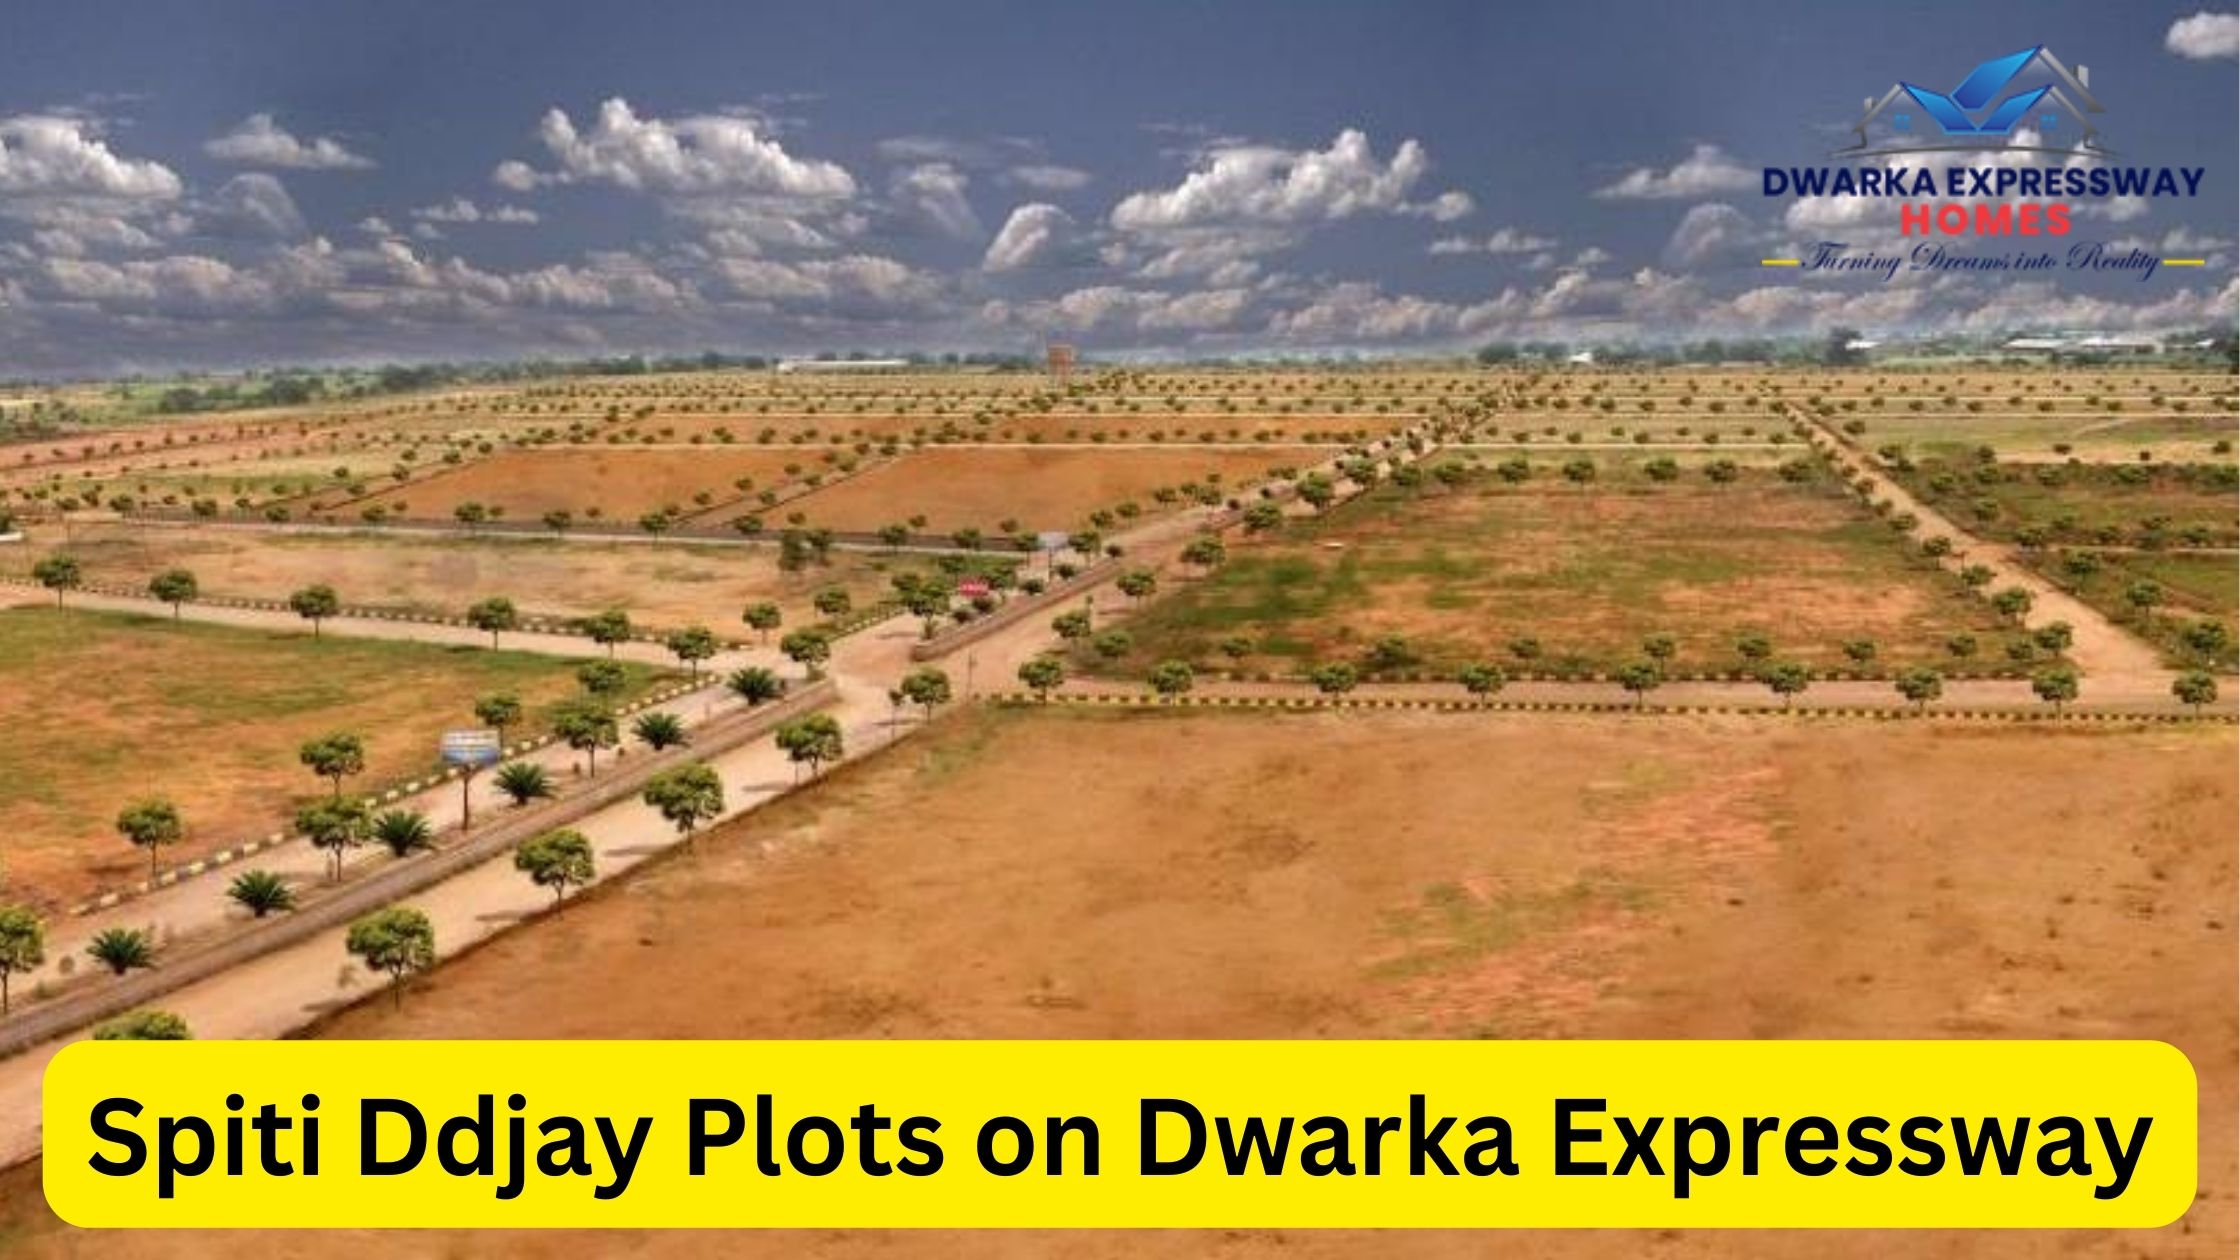 Investing in Tomorrow: Why Spiti Ddjay Plots on Dwarka Expressway Are a Smart Choice